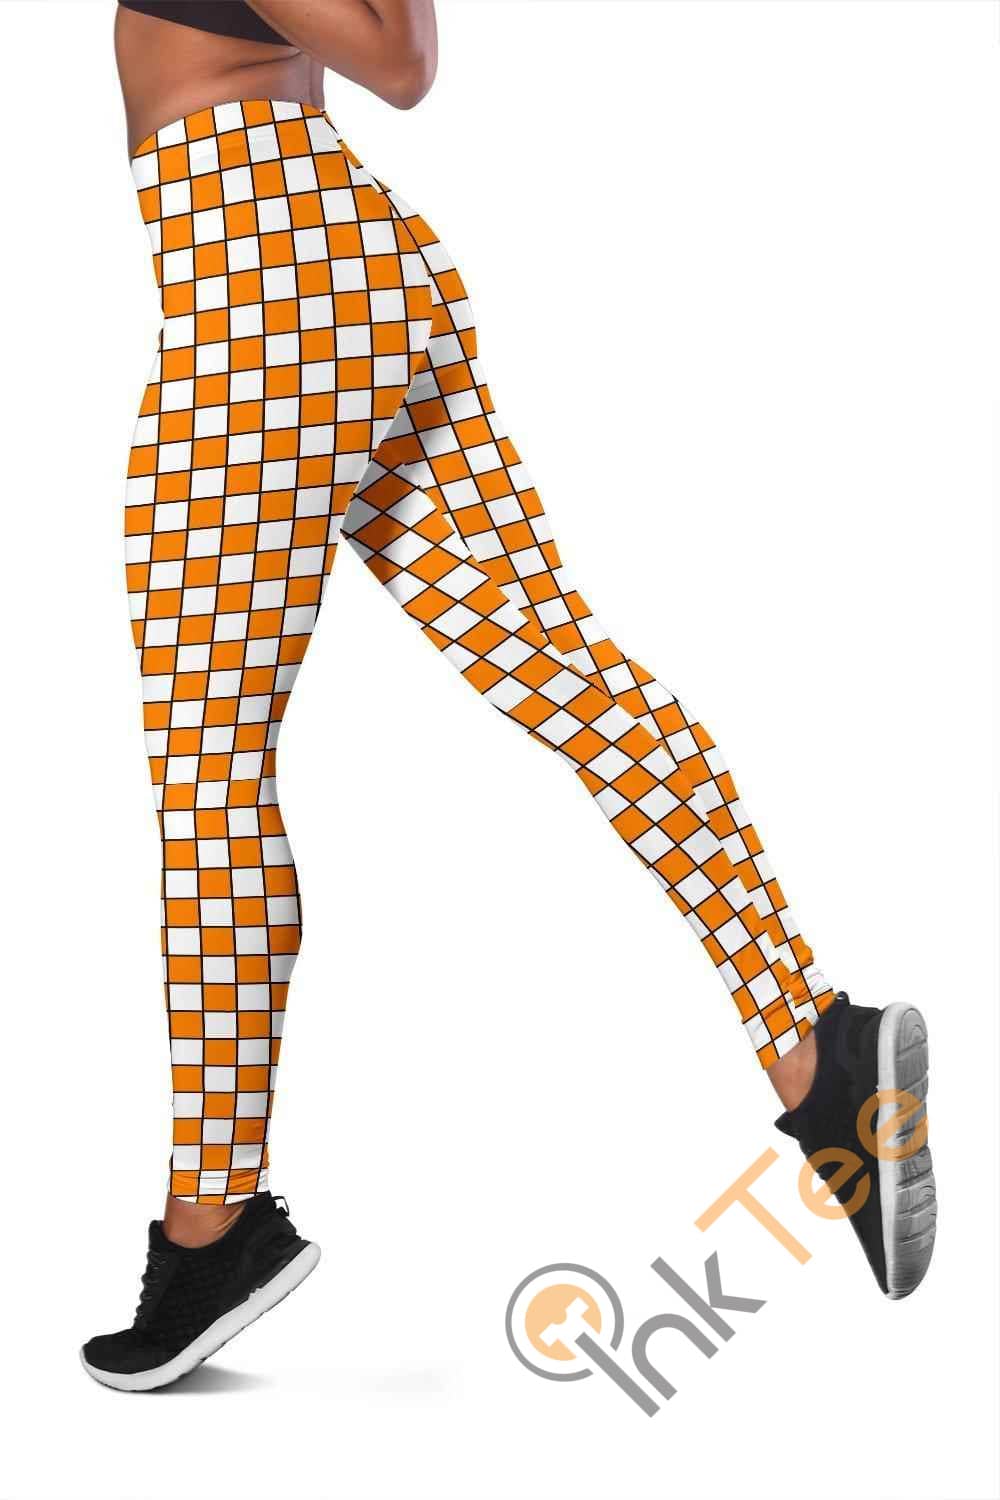 Inktee Store - Tennessee Volunteers Fan Inspired 3D All Over Print For Yoga Fitness Checkers Women'S Leggings Image